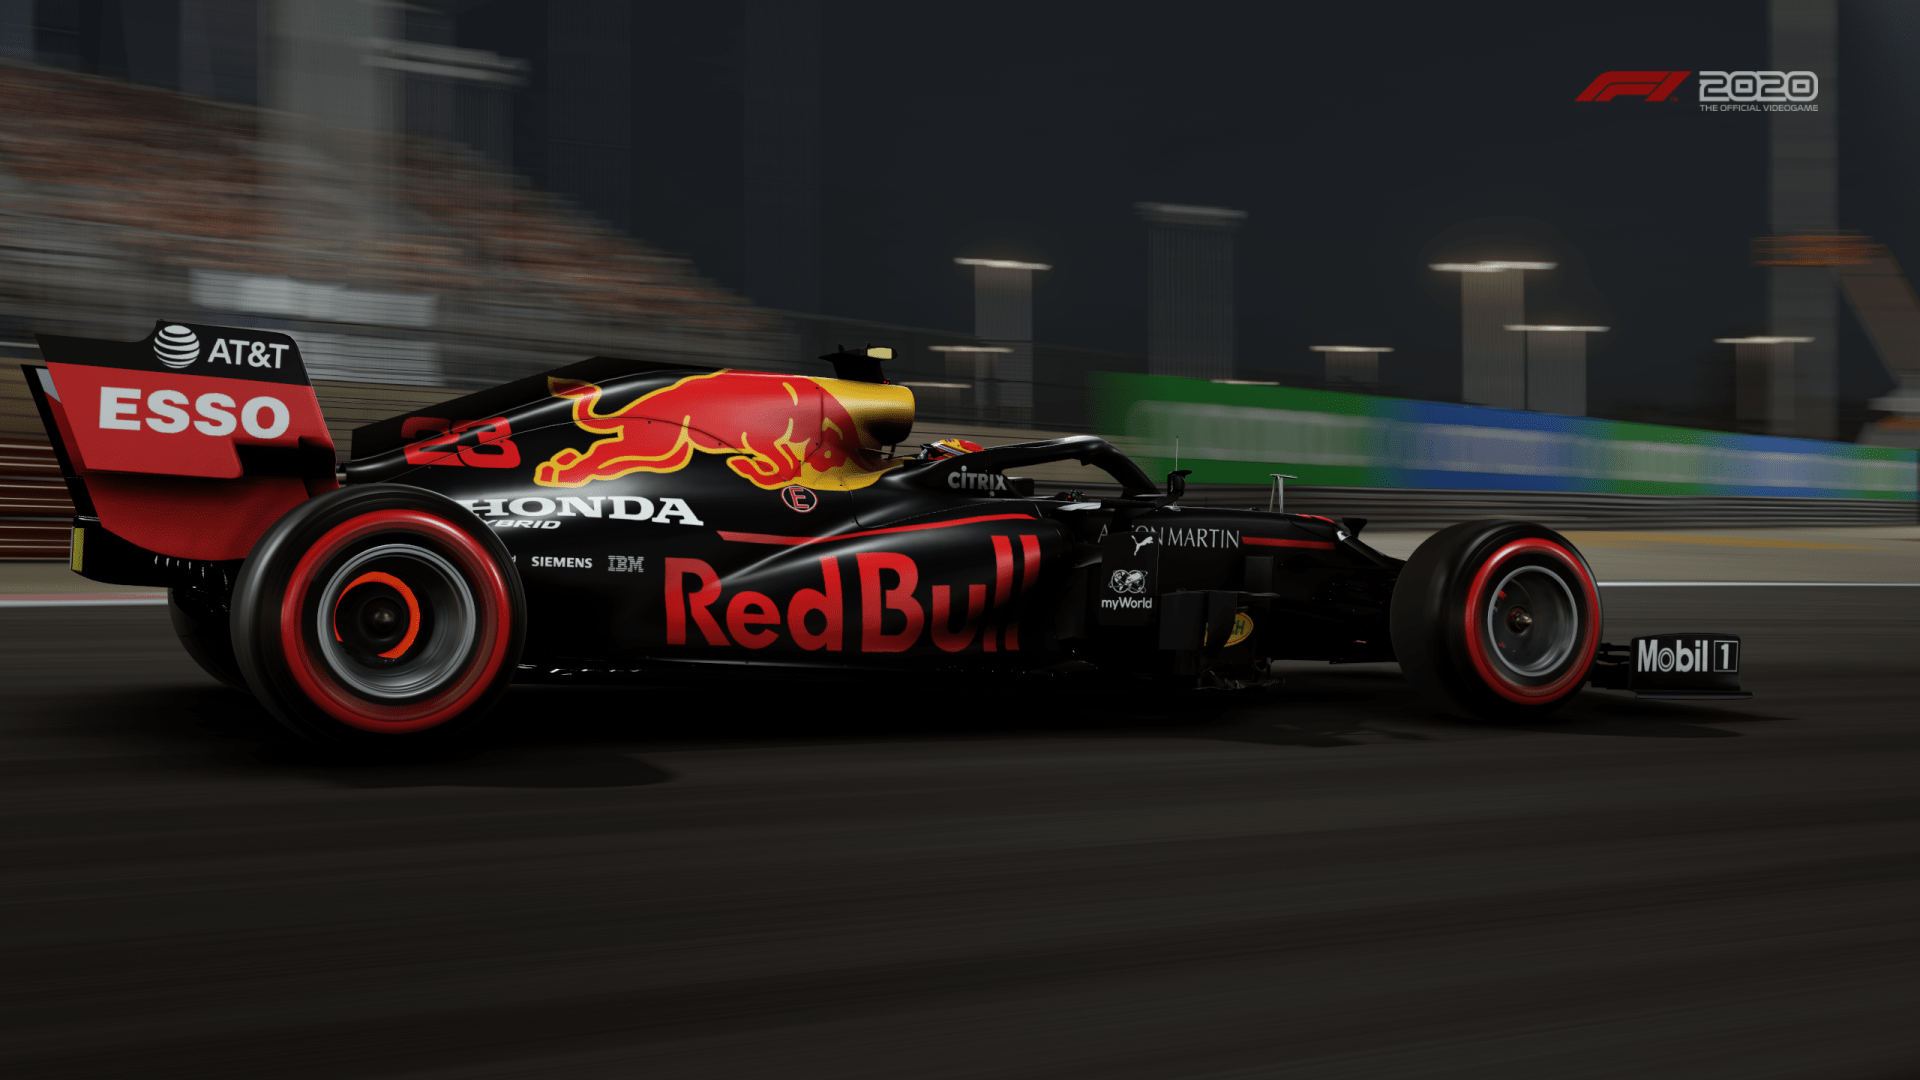 Aston Martin Red Bull F1 Wallpapers Top Free Aston Martin Red Bull F1 Backgrounds Wallpaperaccess